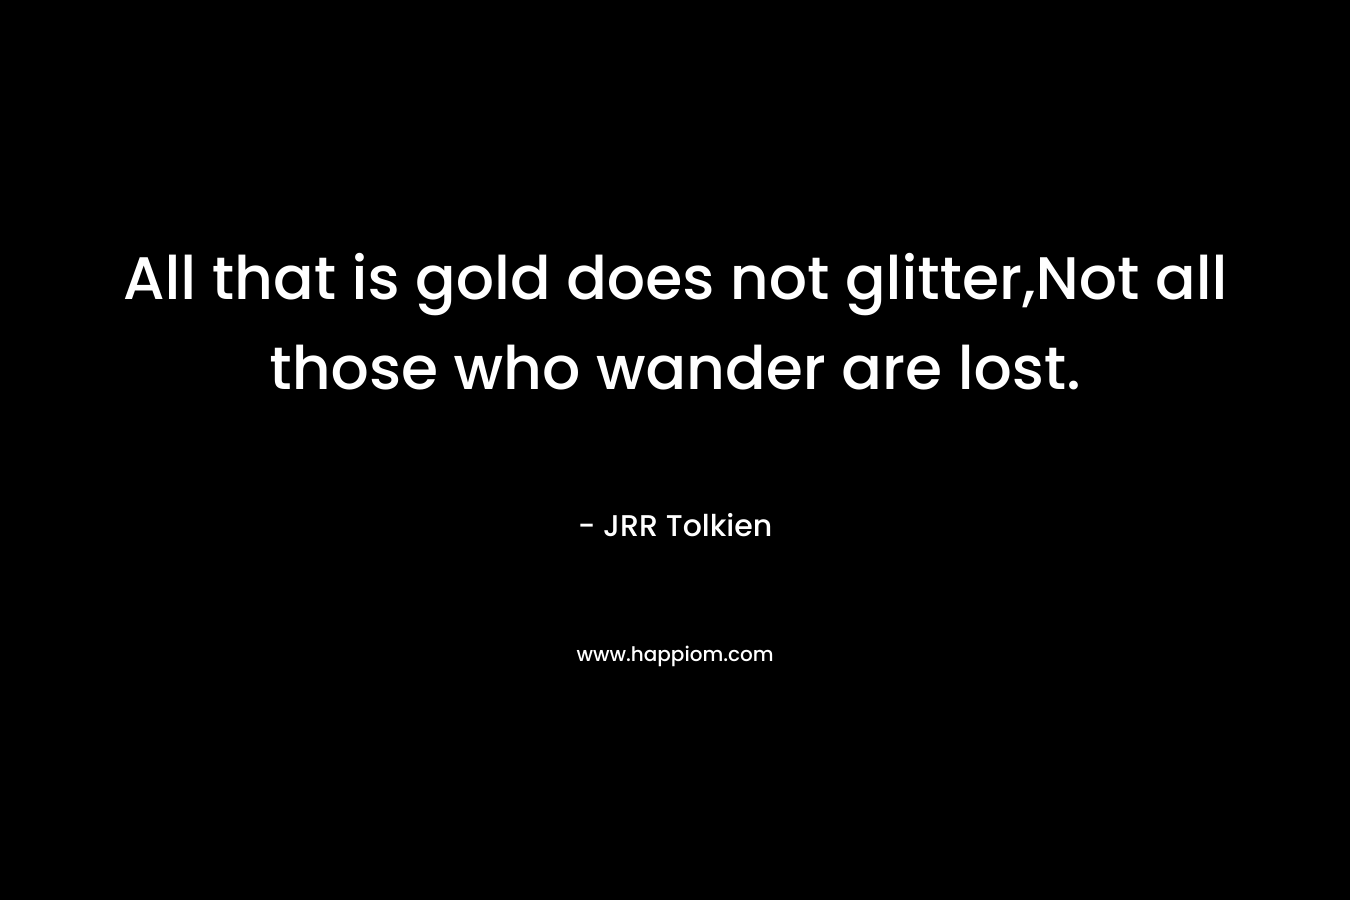 All that is gold does not glitter,Not all those who wander are lost.